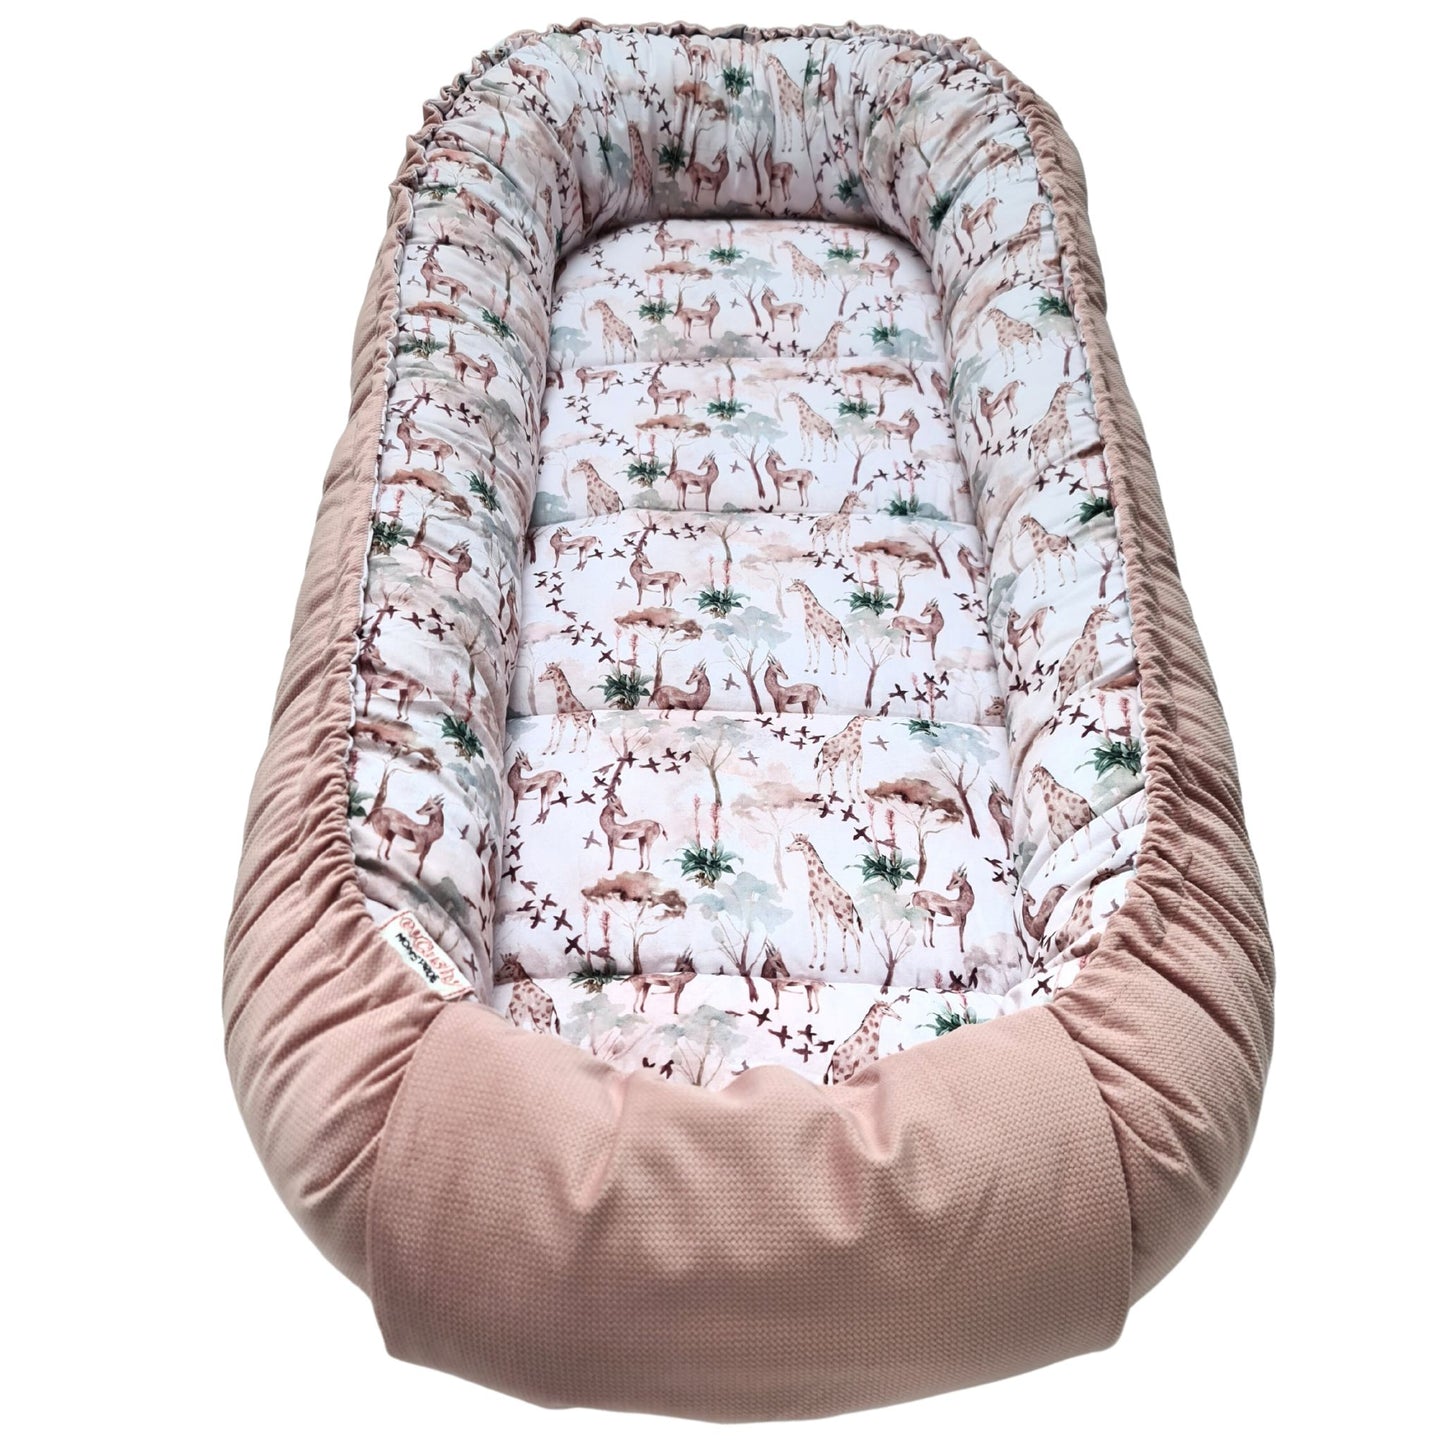 evcushy pod for juniors up to 36 months pink